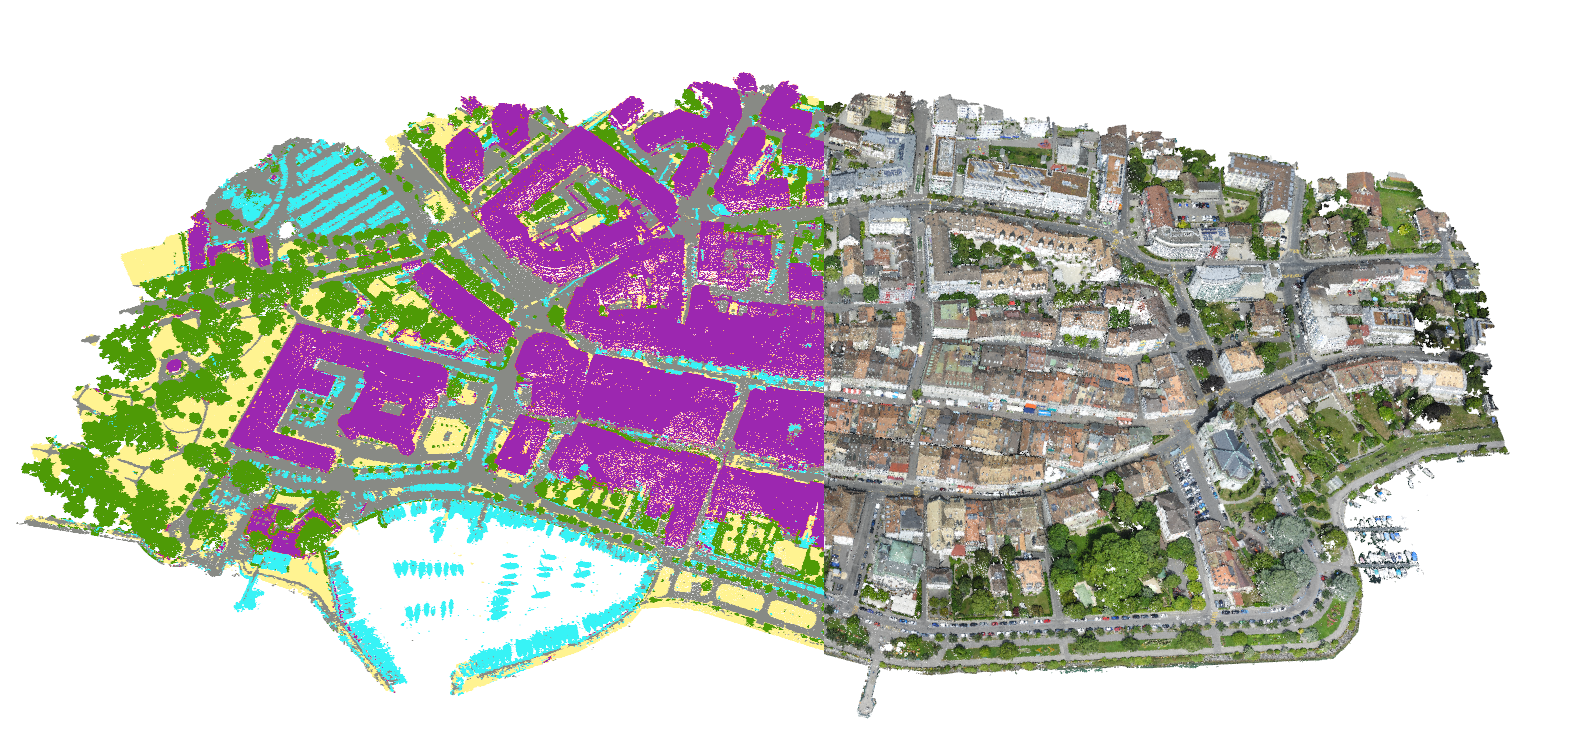 an image showing classifications overlaid on a point cloud. The colours indicate there are buildings, vegetation and human-made objects.